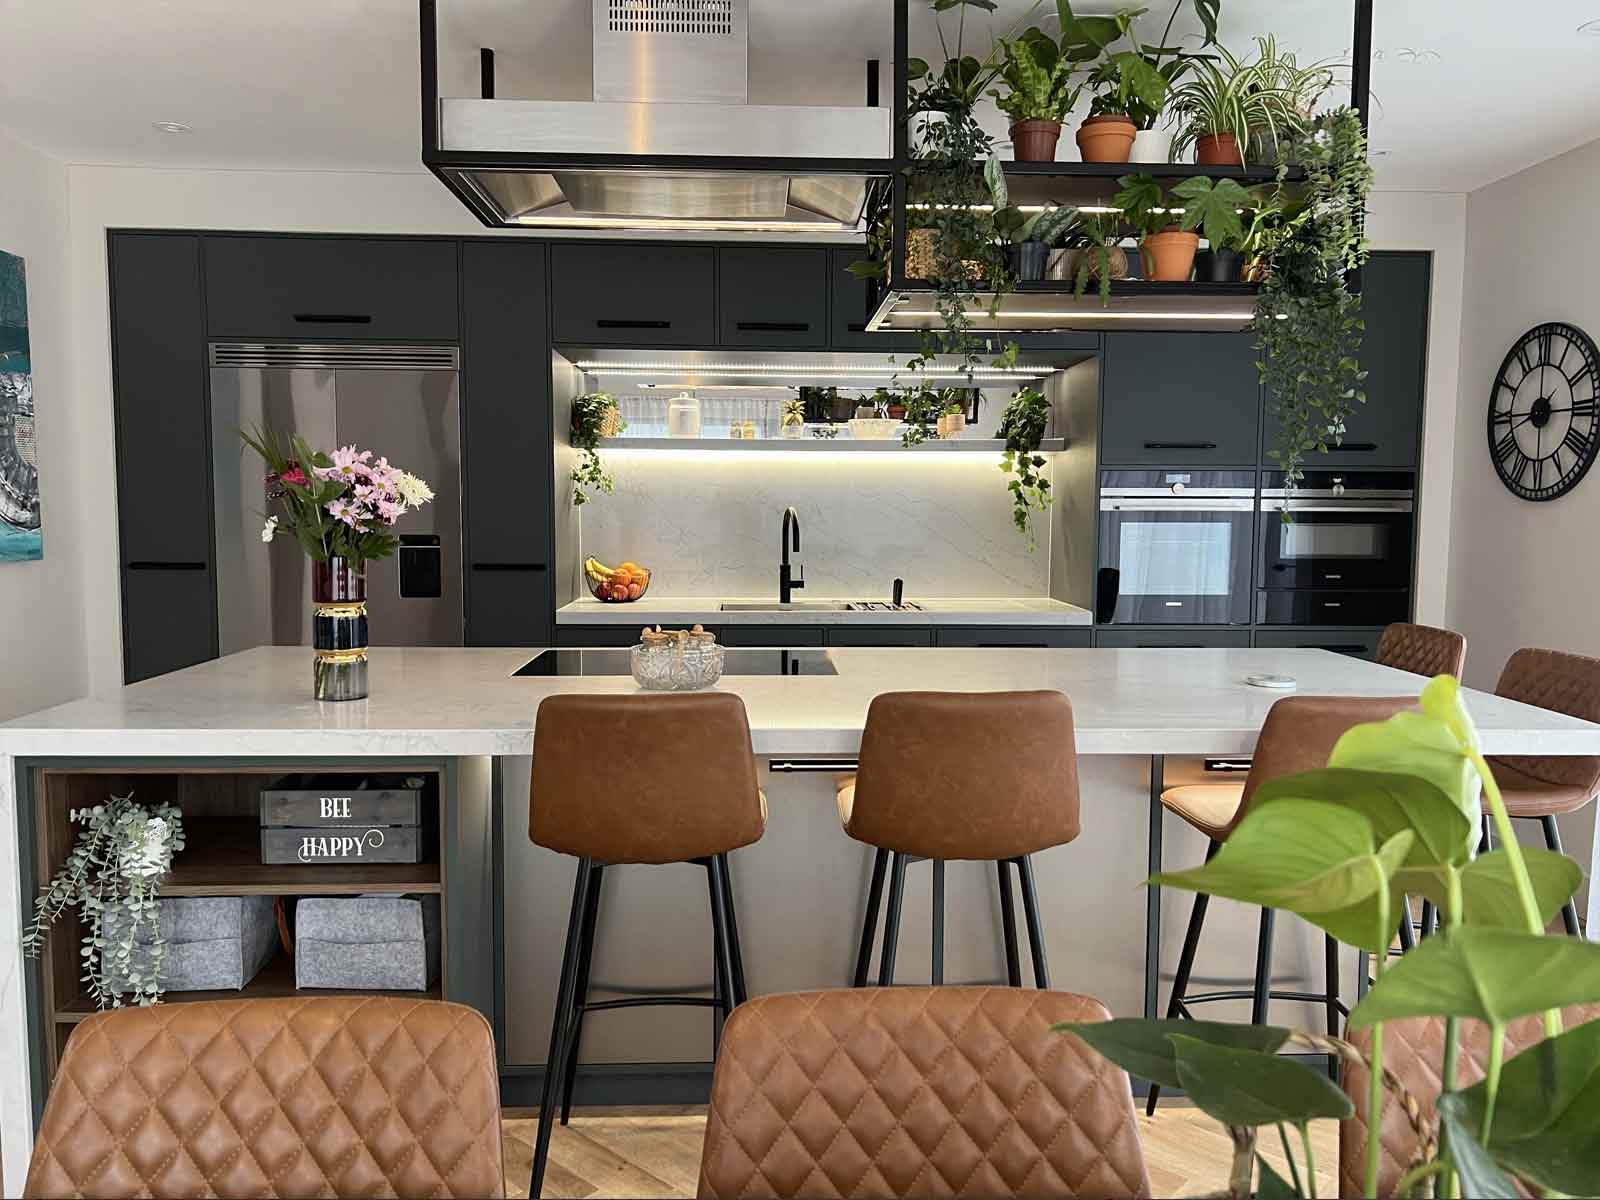 A biophilic kitchen with decorative stone worktops and wood walnut shelves